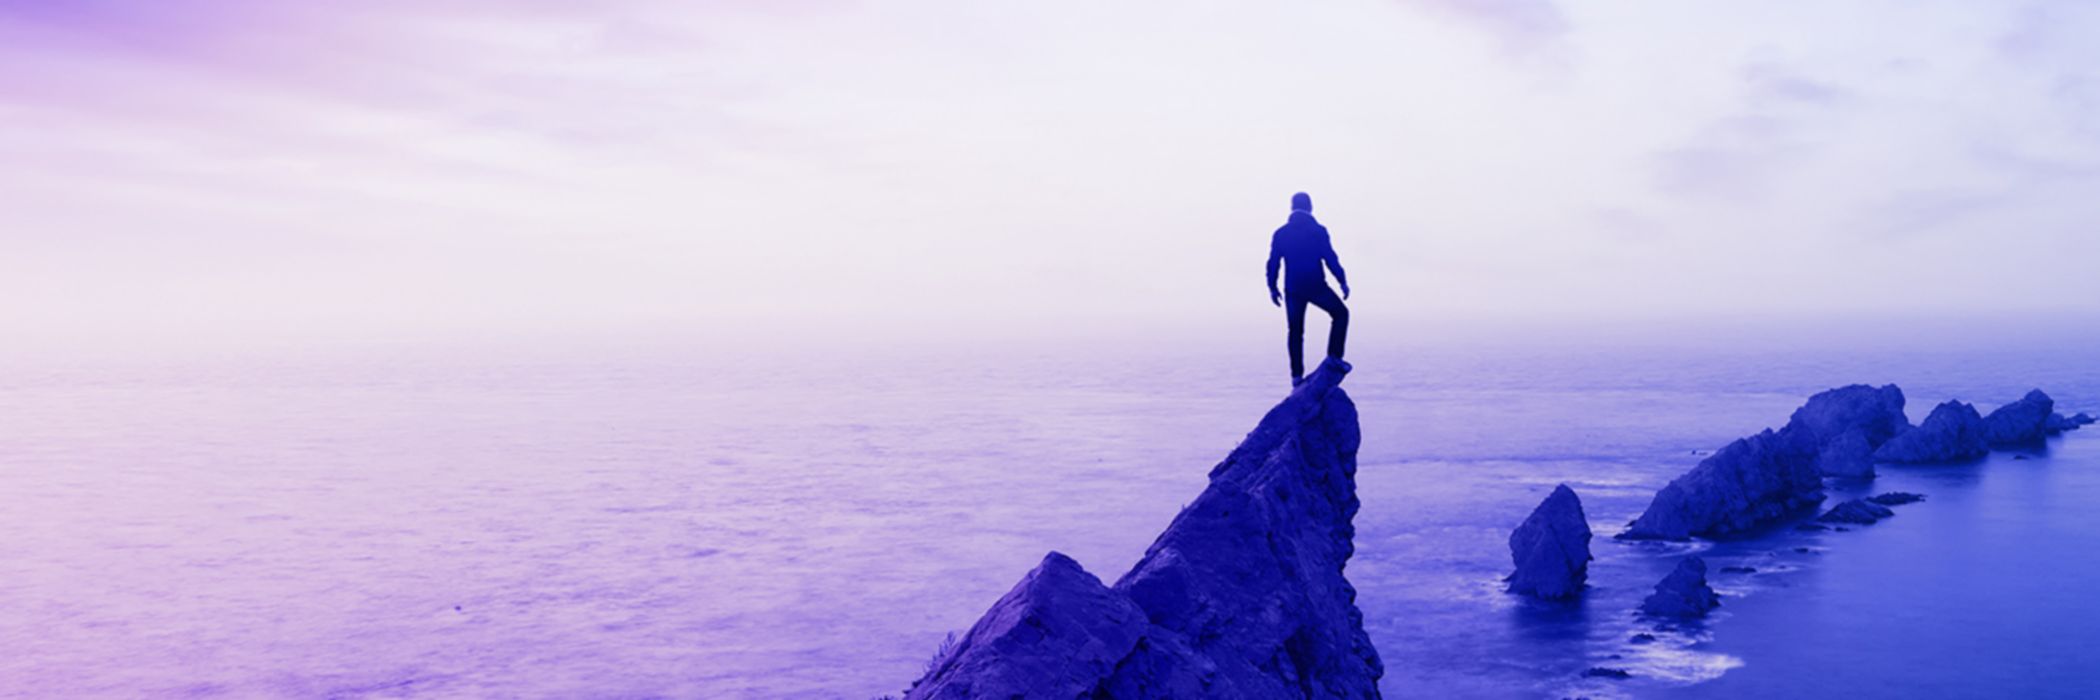 Man standing on the cliff